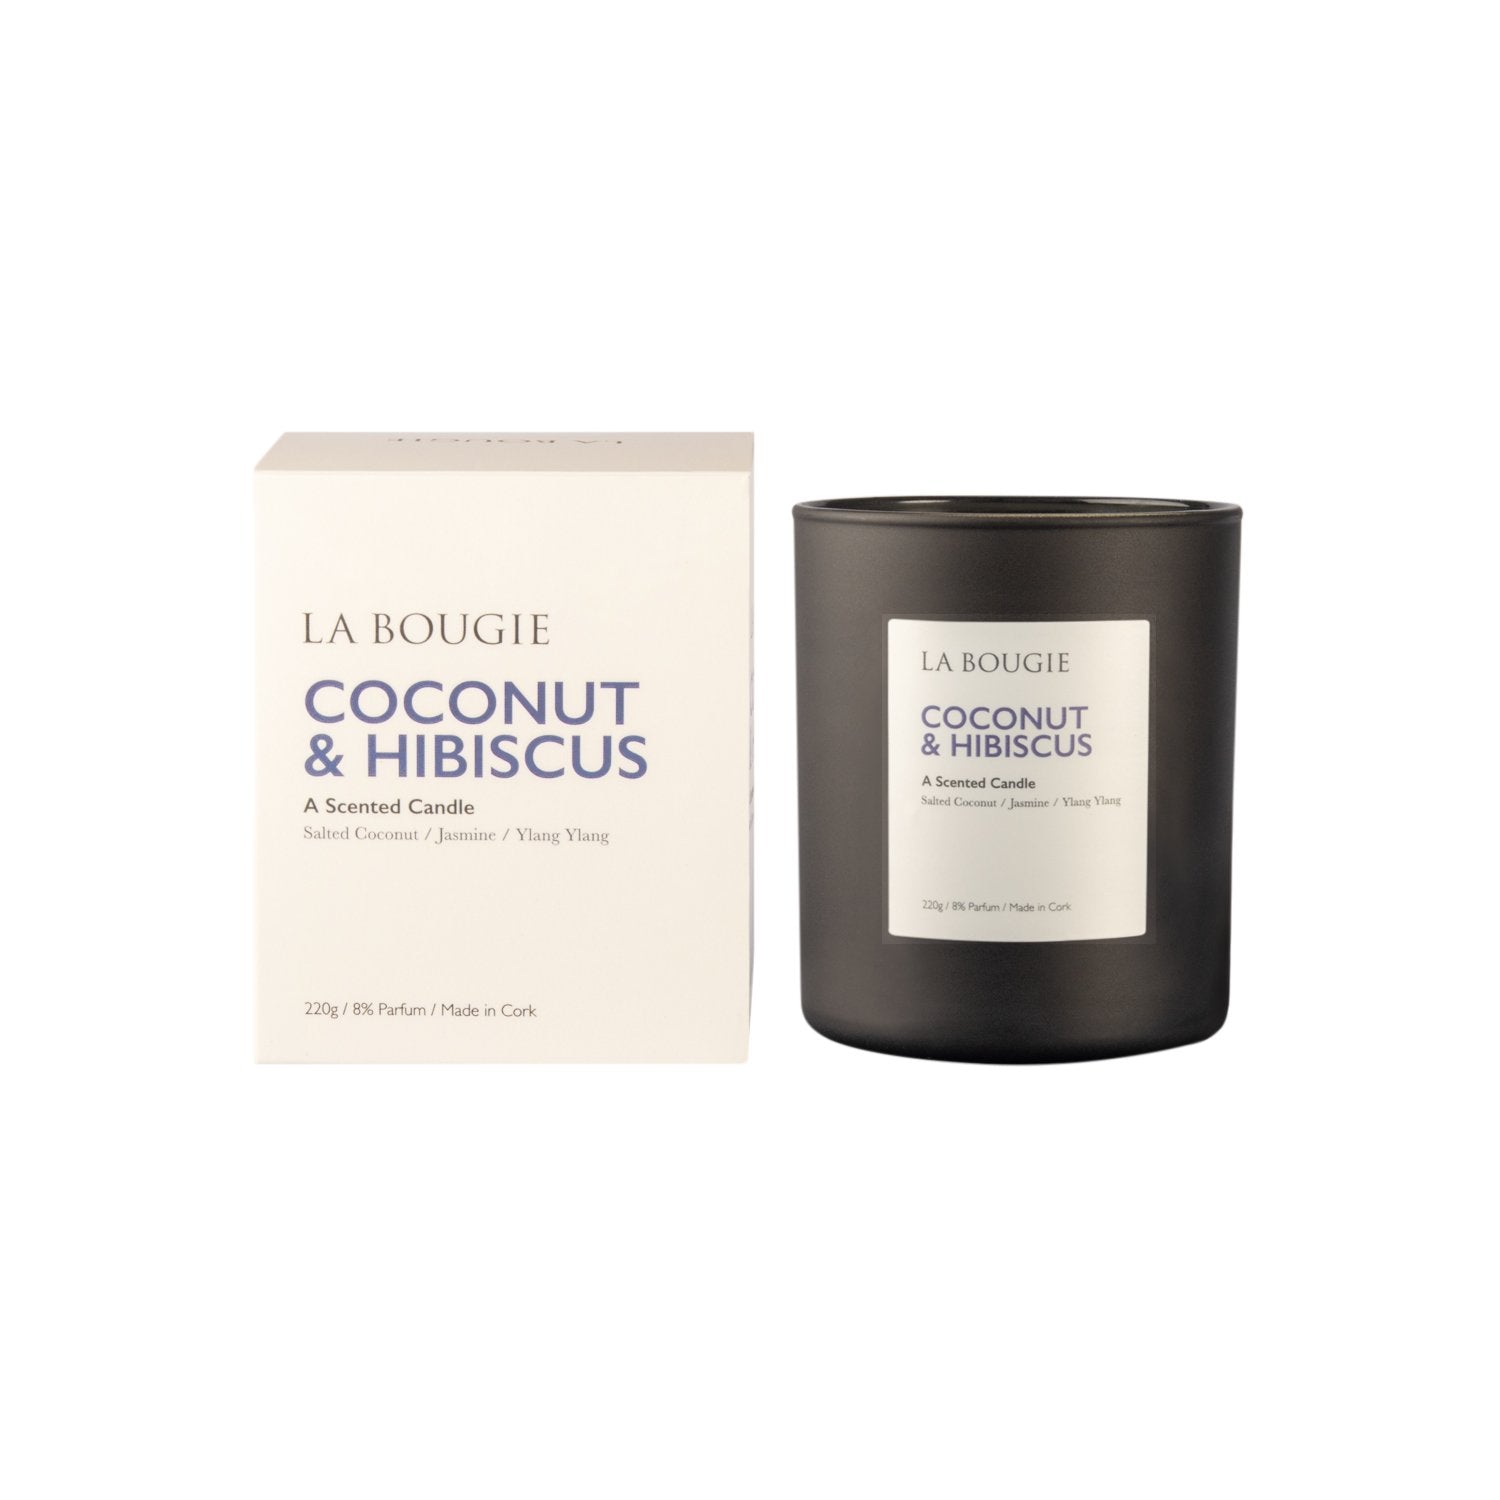 La Bougie Coconut and Hibiscus Candle